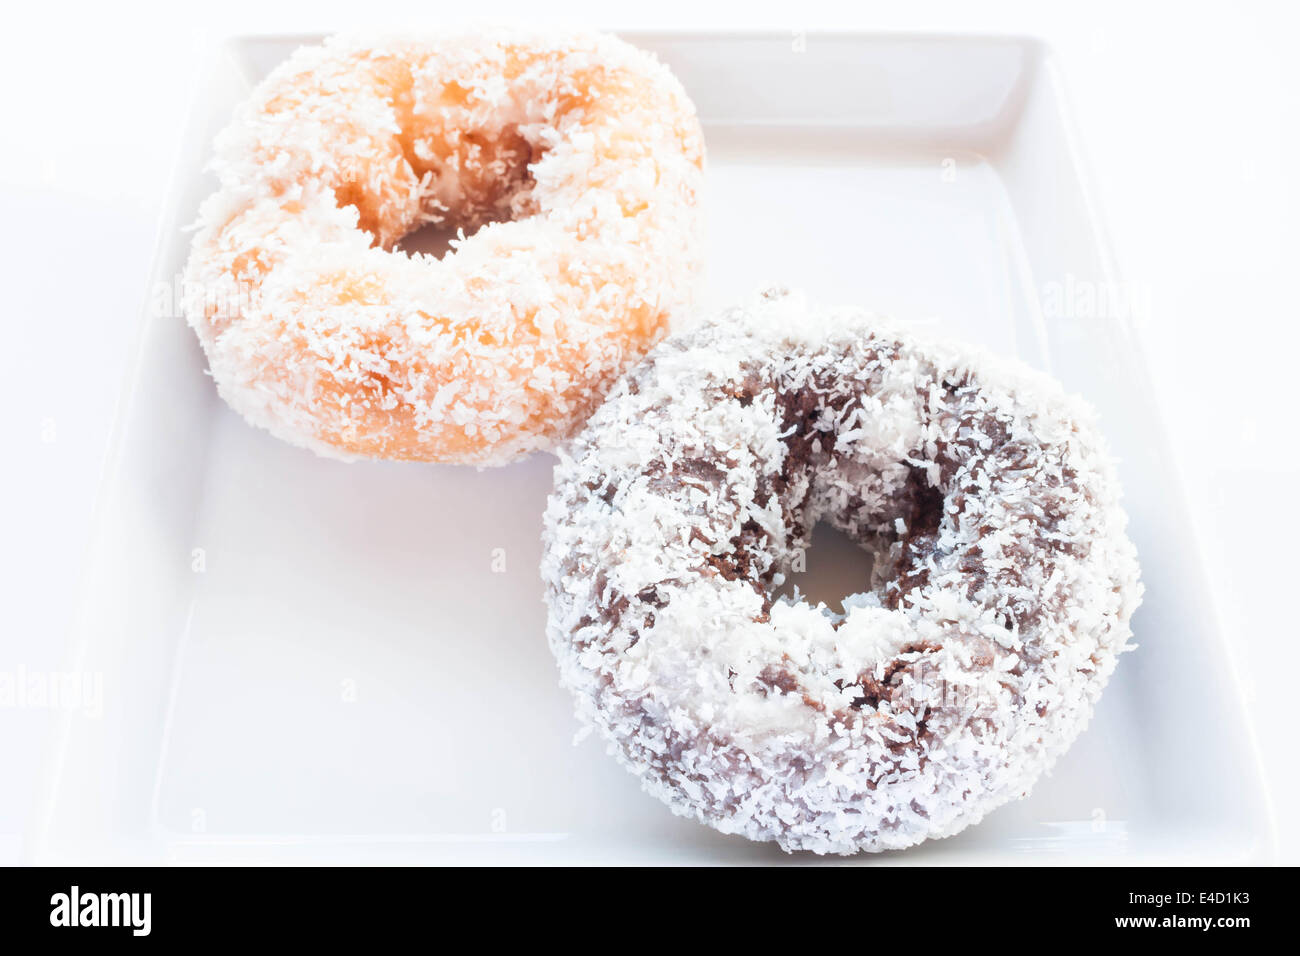 Chocolate and vanilla donuts with coconut cover, stock photo Stock Photo